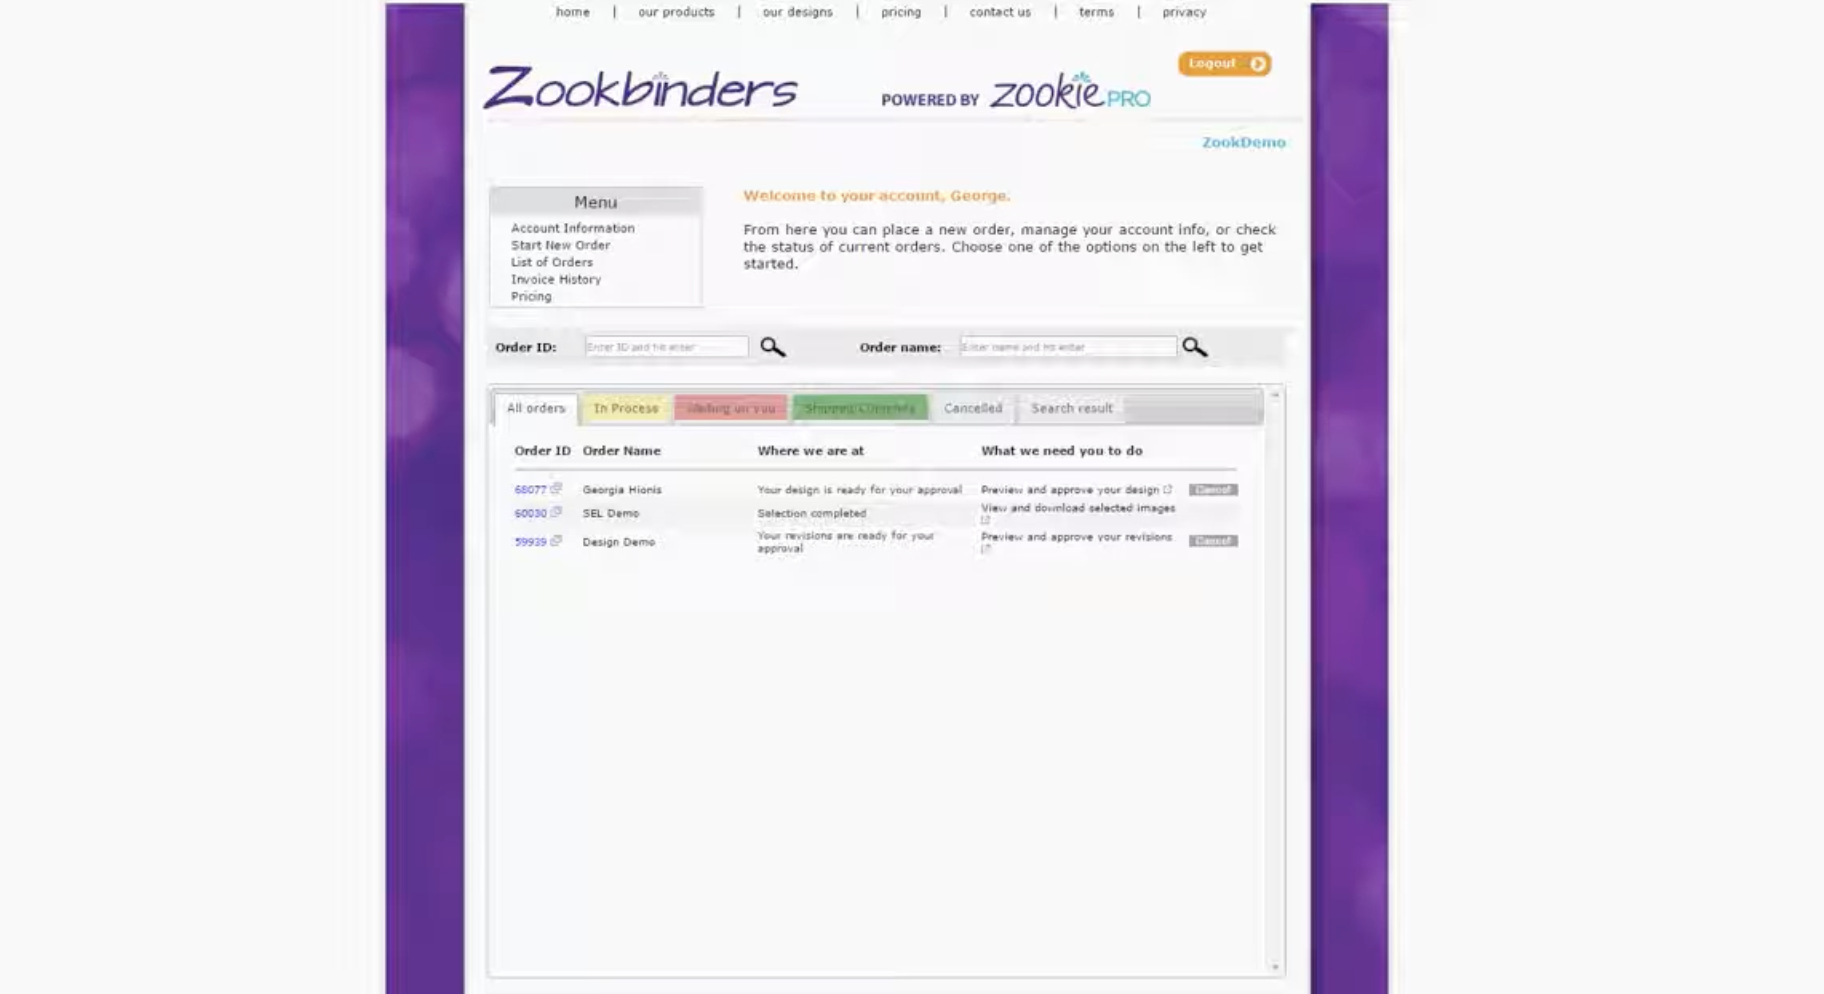 sales and marketing, Sales and Marketing Album Resource Toolkit, Zookbinders